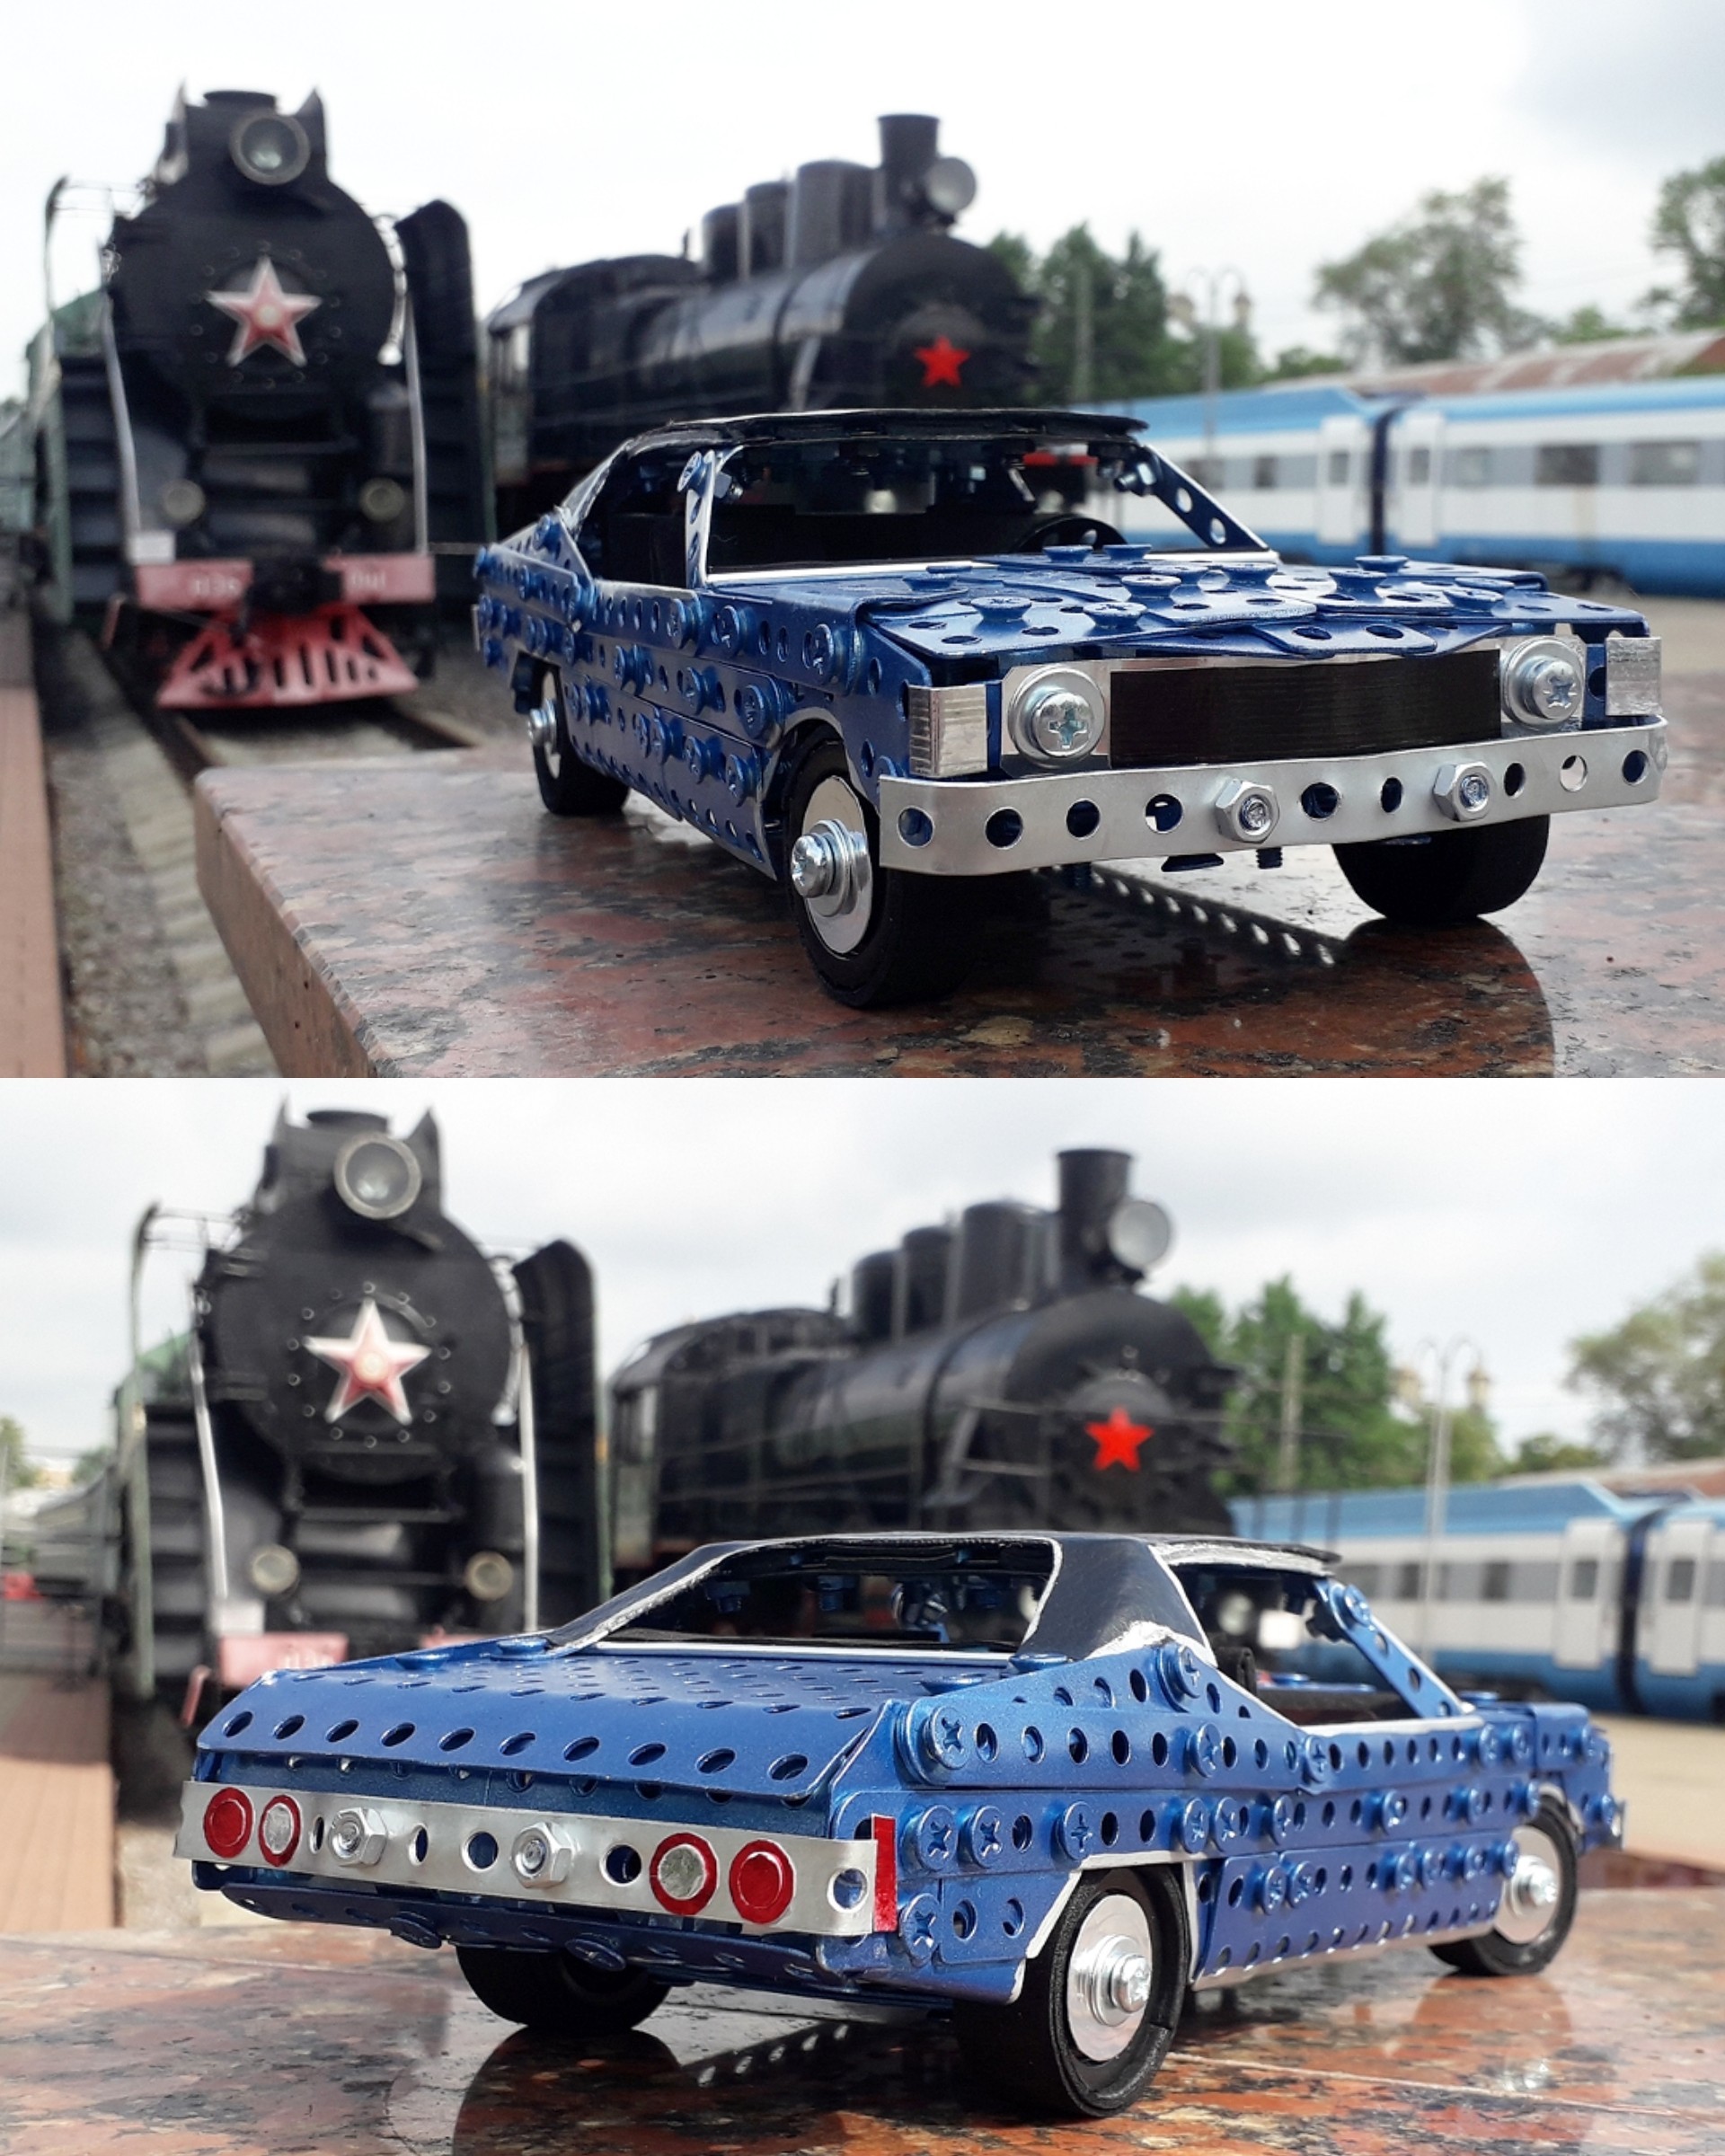 1972 Chevrolet Chevelle made of metal constructor, wire, rubber, leather and cardboard - My, Chevrolet, Locomotive, Constructor, Retro car, Modeling, Retro, Homemade